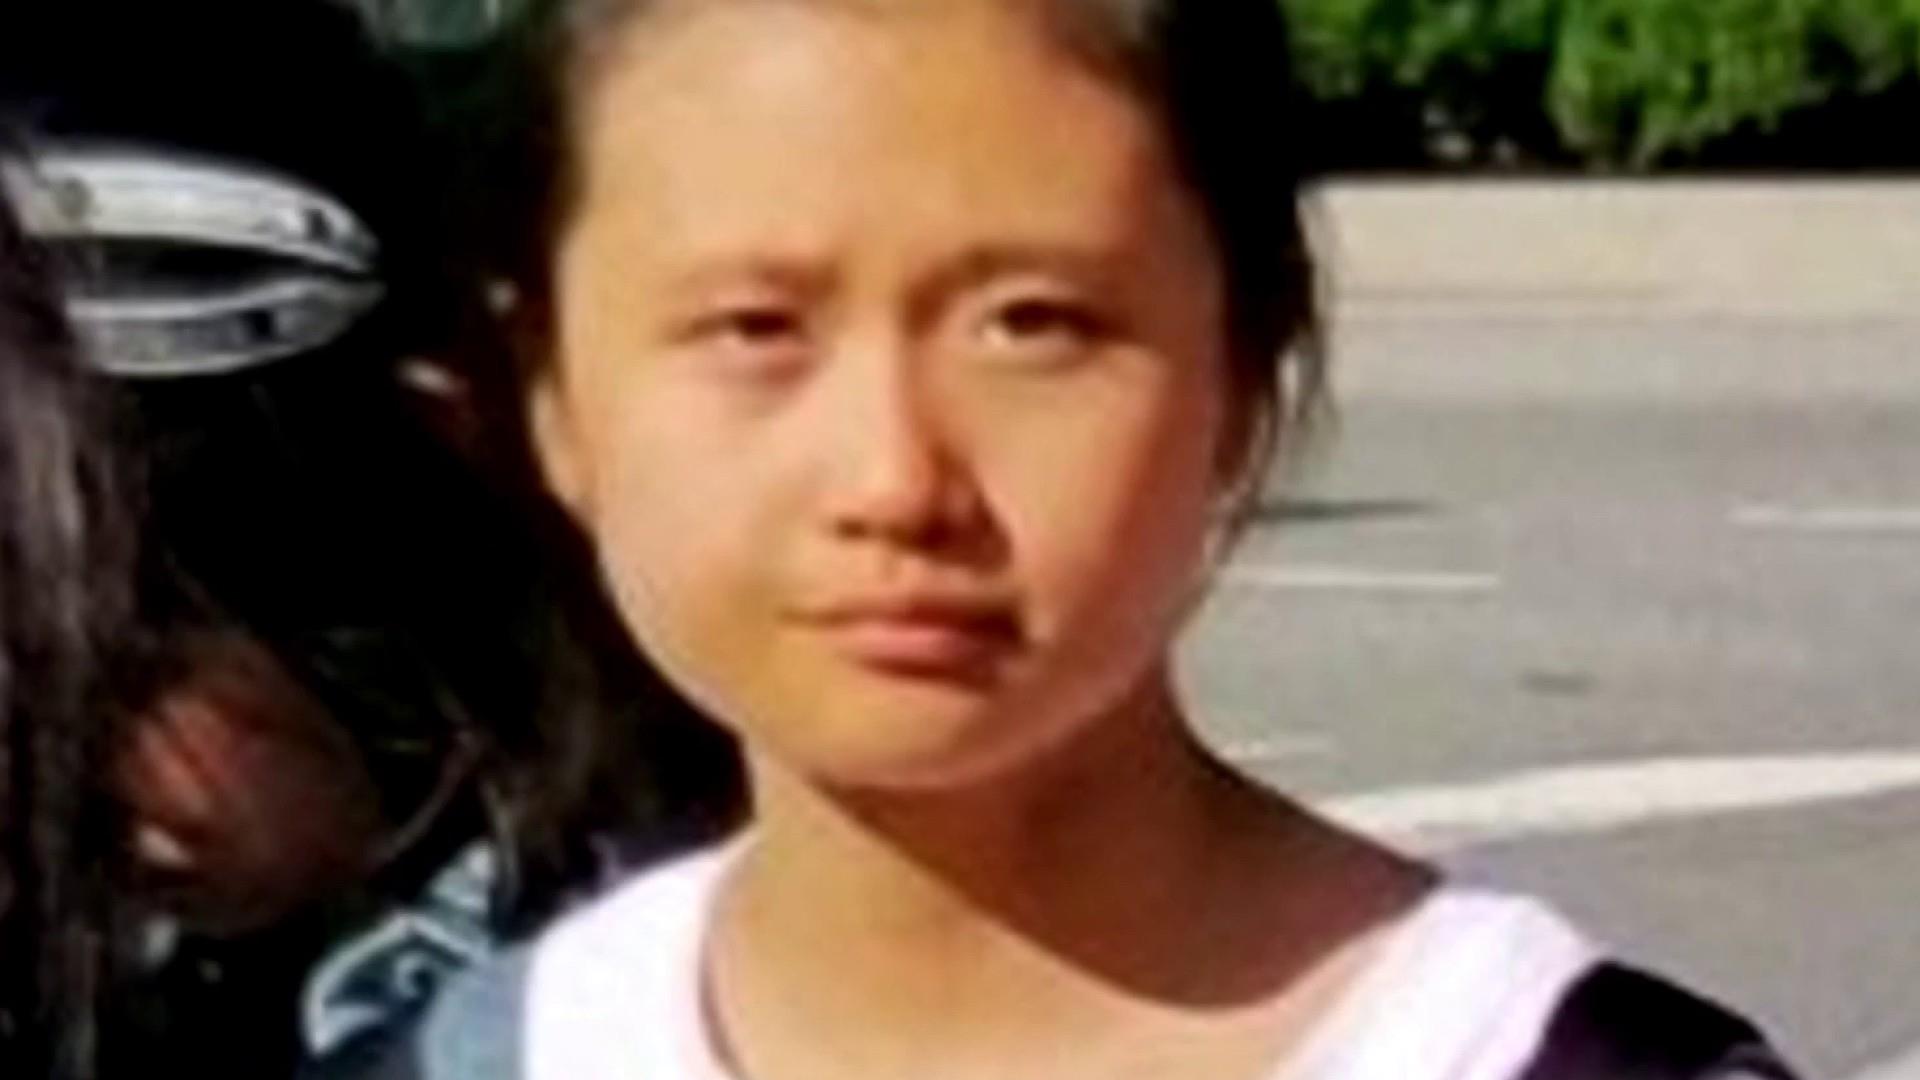 12 year old asian girl abducted reagan airport